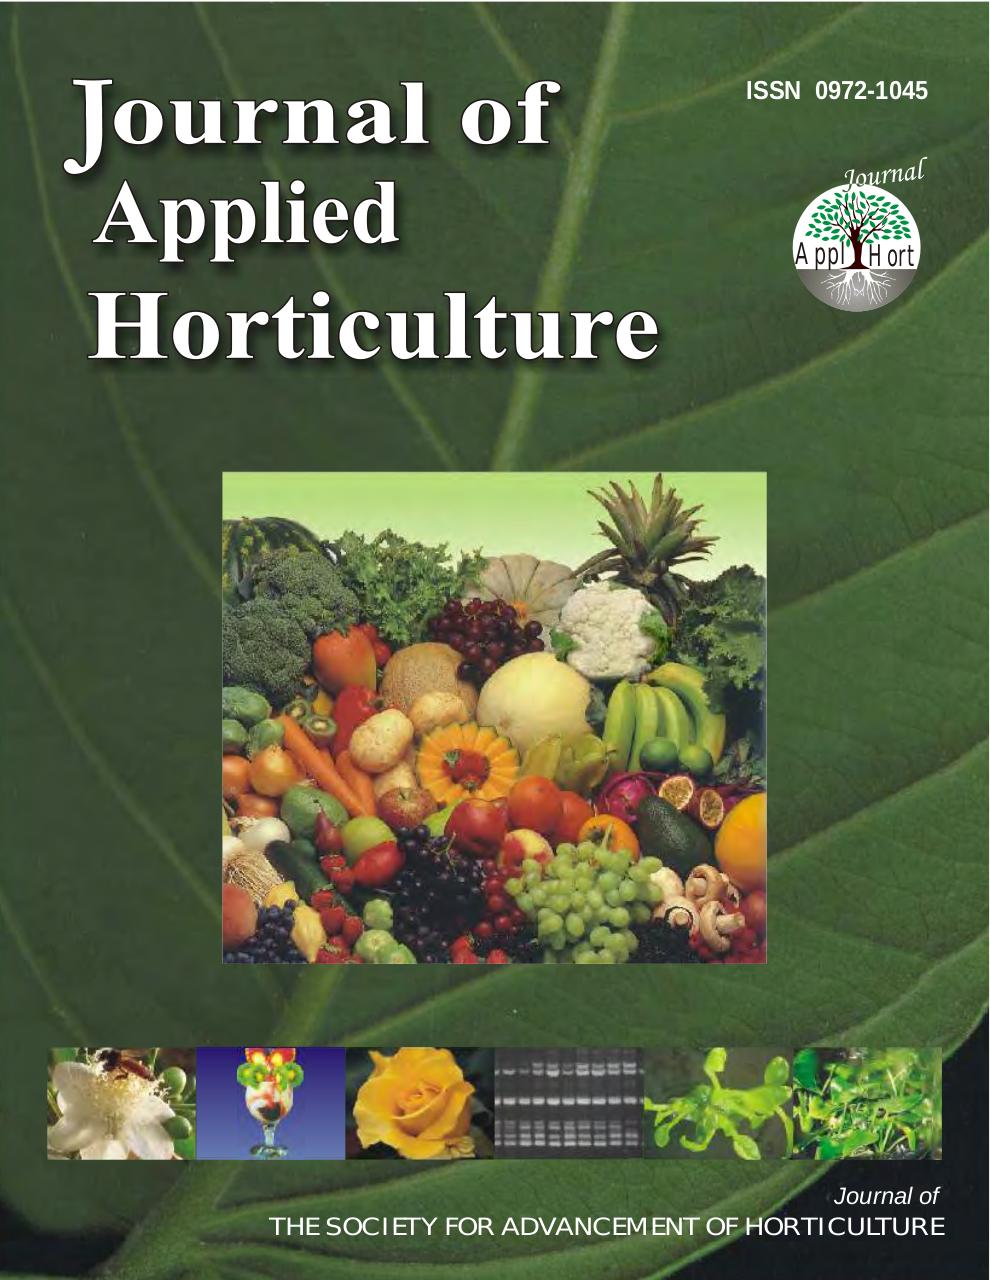 contents journal_of_Apllied_Horticulture.pdf_2.pdf - page 1/33